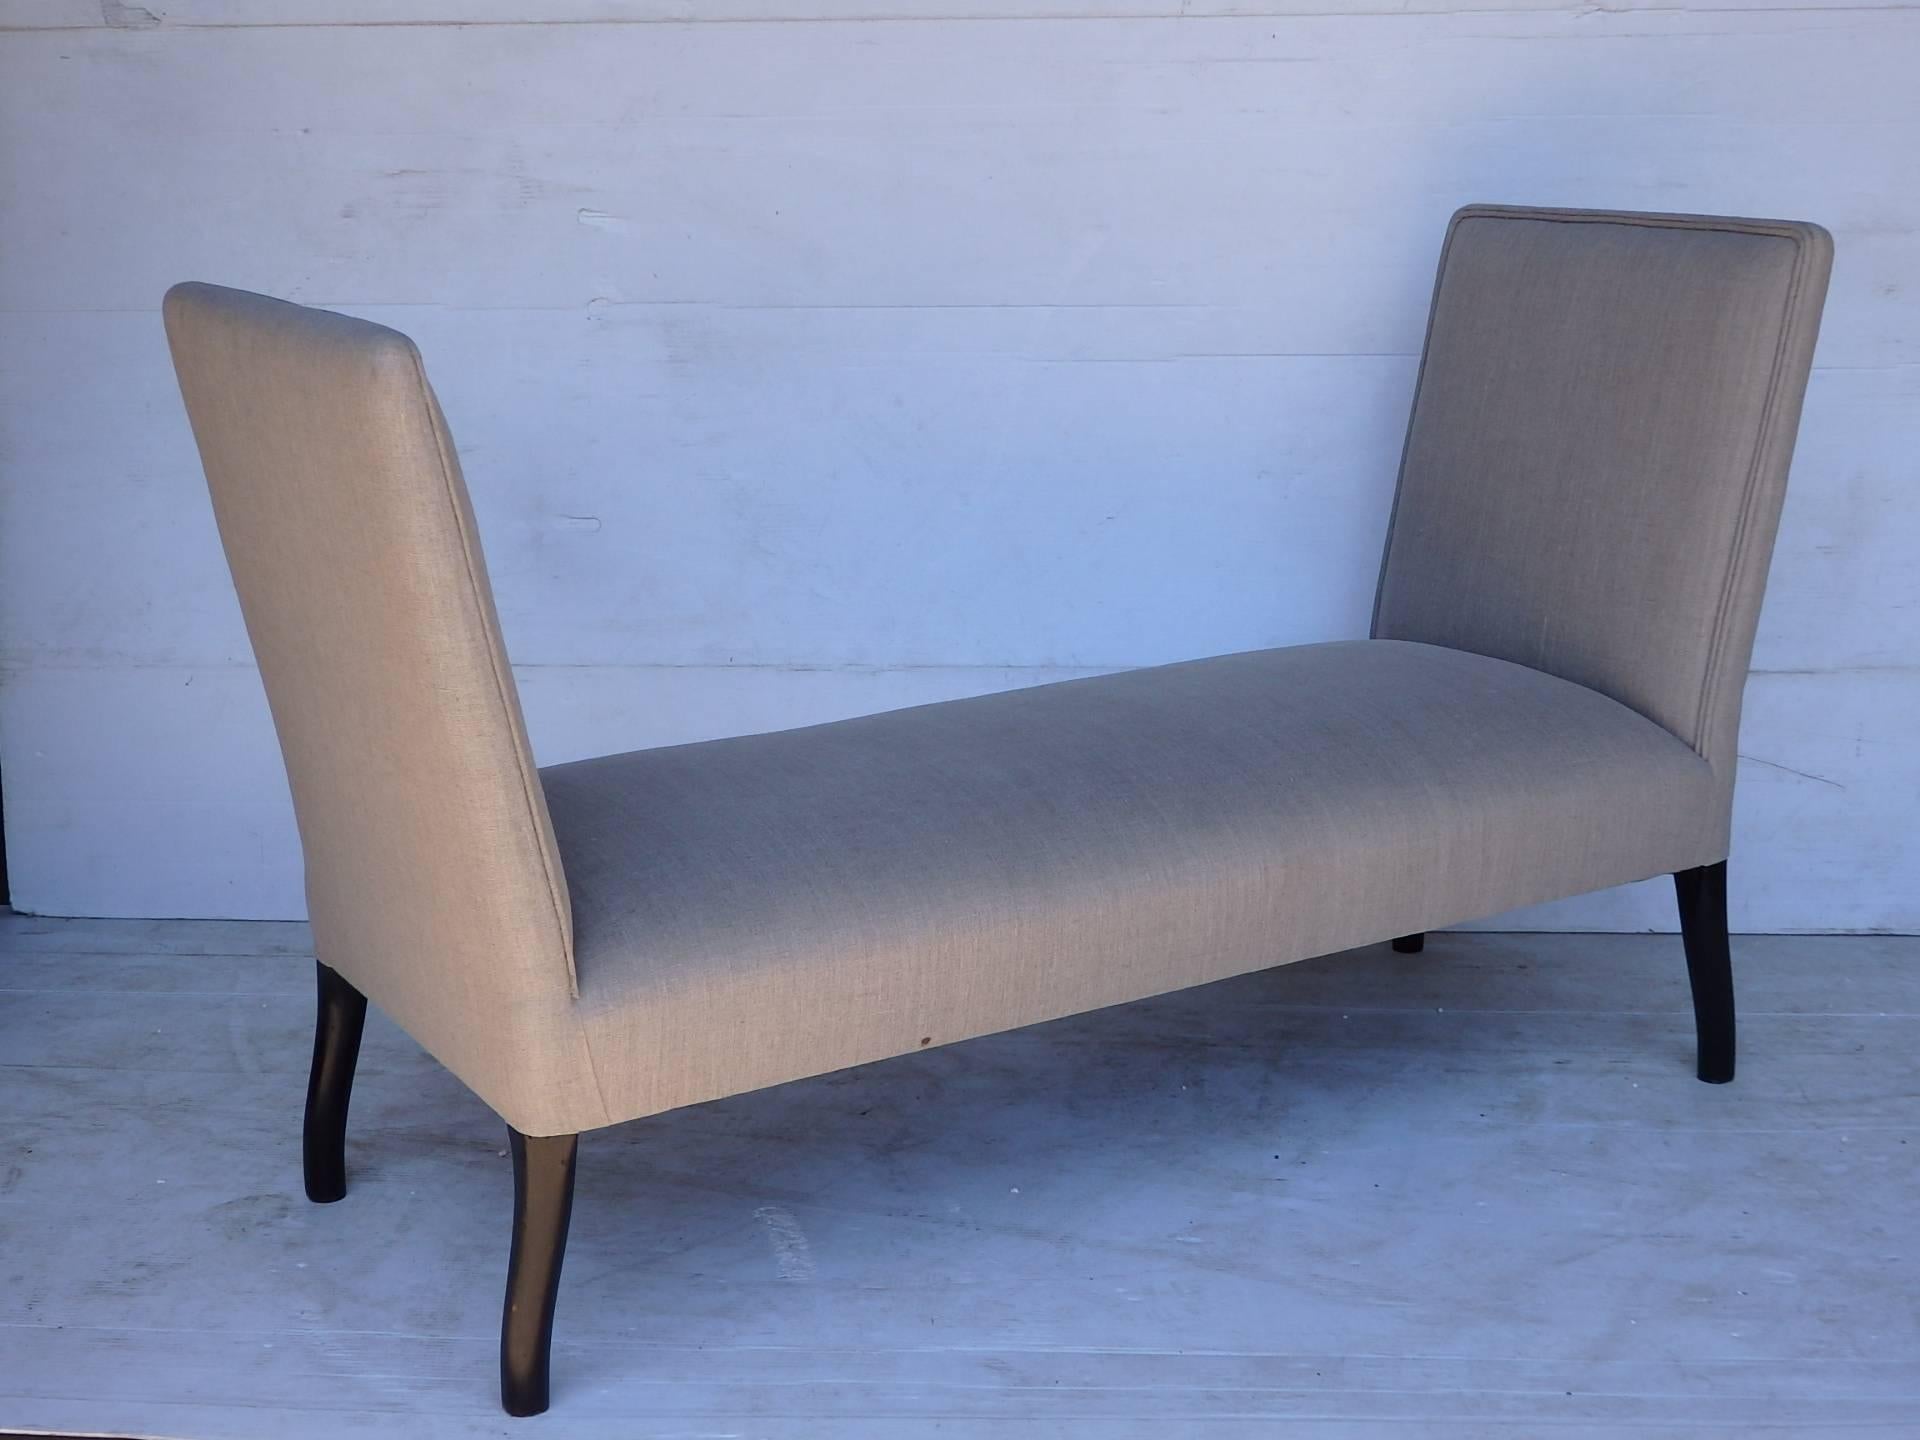 Pair of English seats, newly upholstered in grey linen.